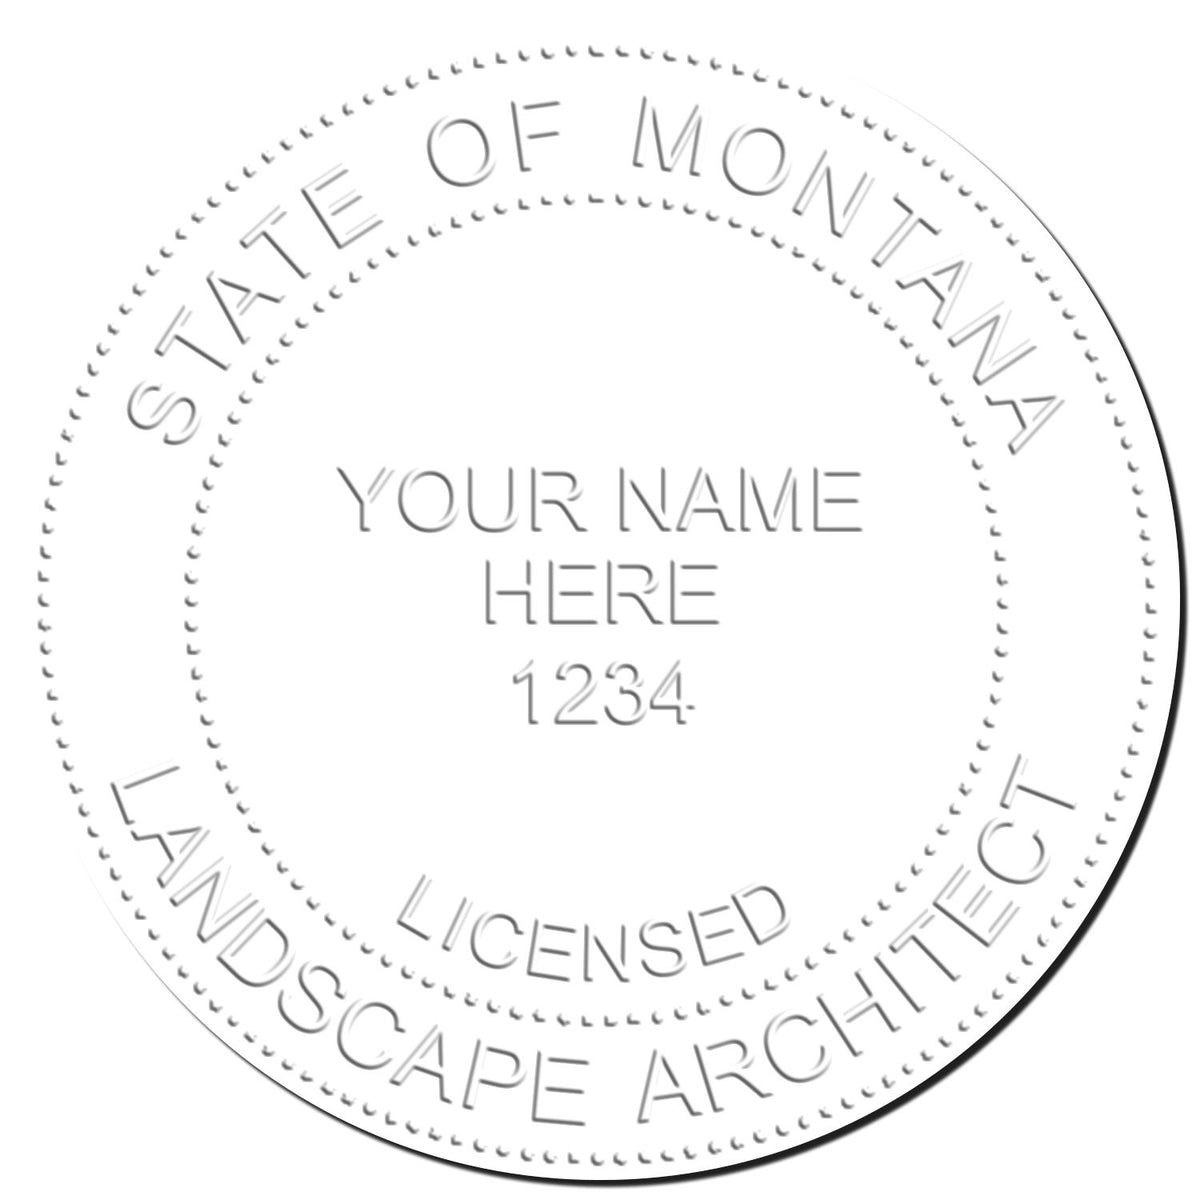 This paper is stamped with a sample imprint of the Hybrid Montana Landscape Architect Seal, signifying its quality and reliability.